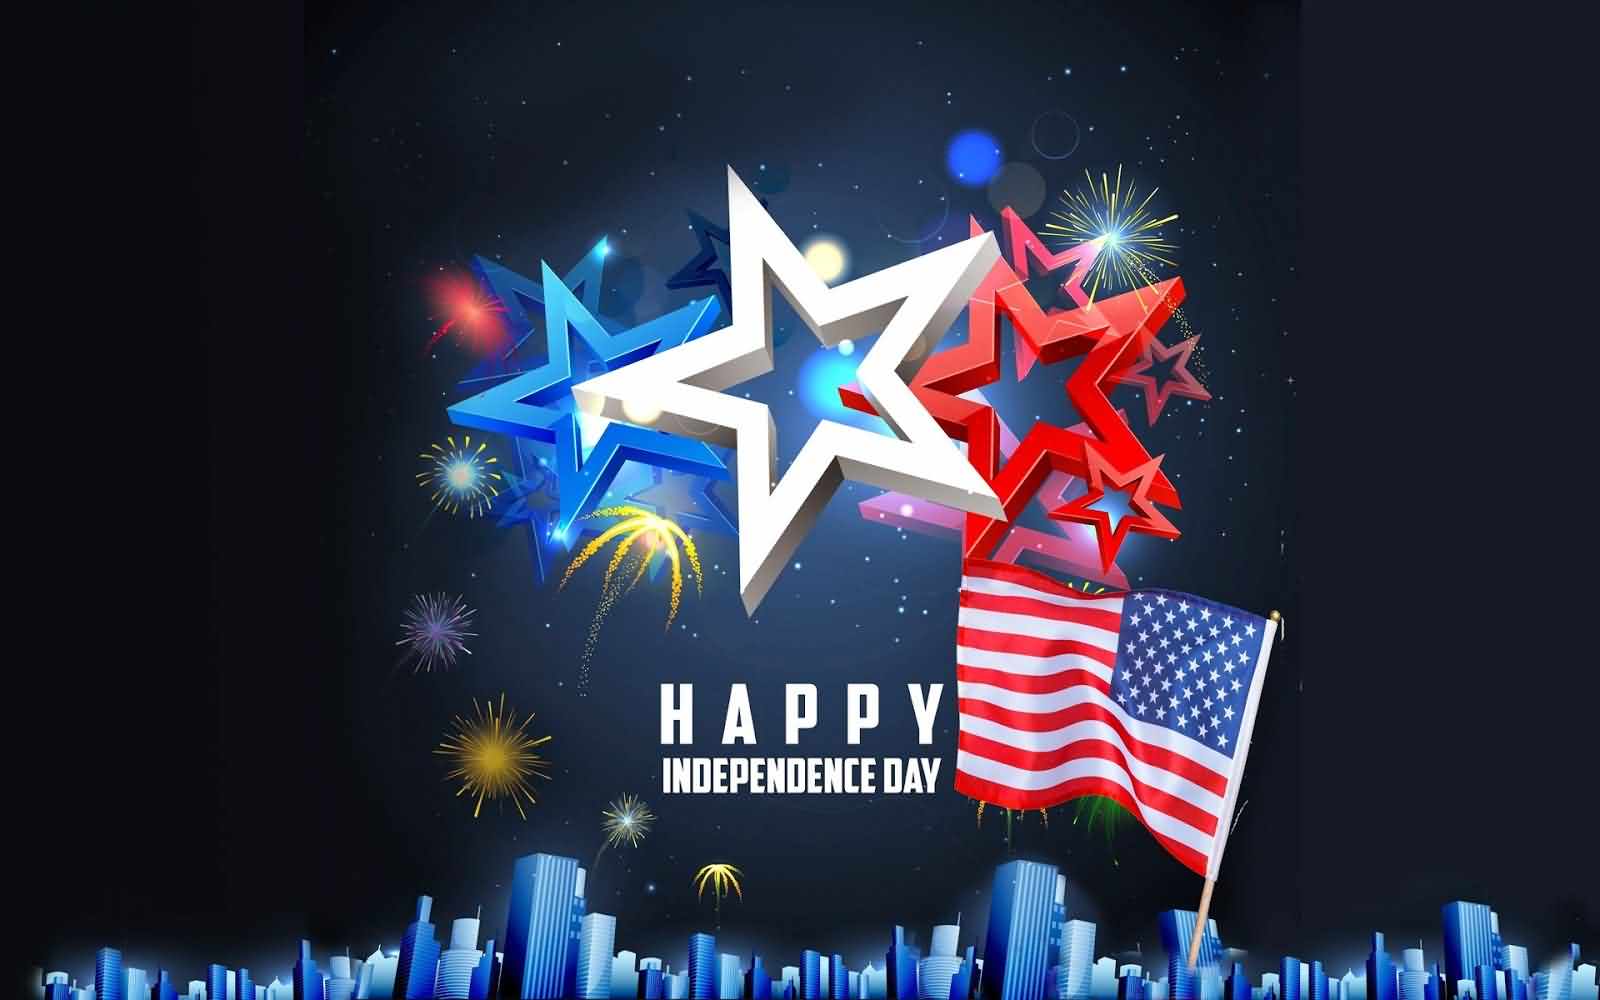 I Love My America Happy Independence Day Wishes Message 4th Of July Greetings Message Image